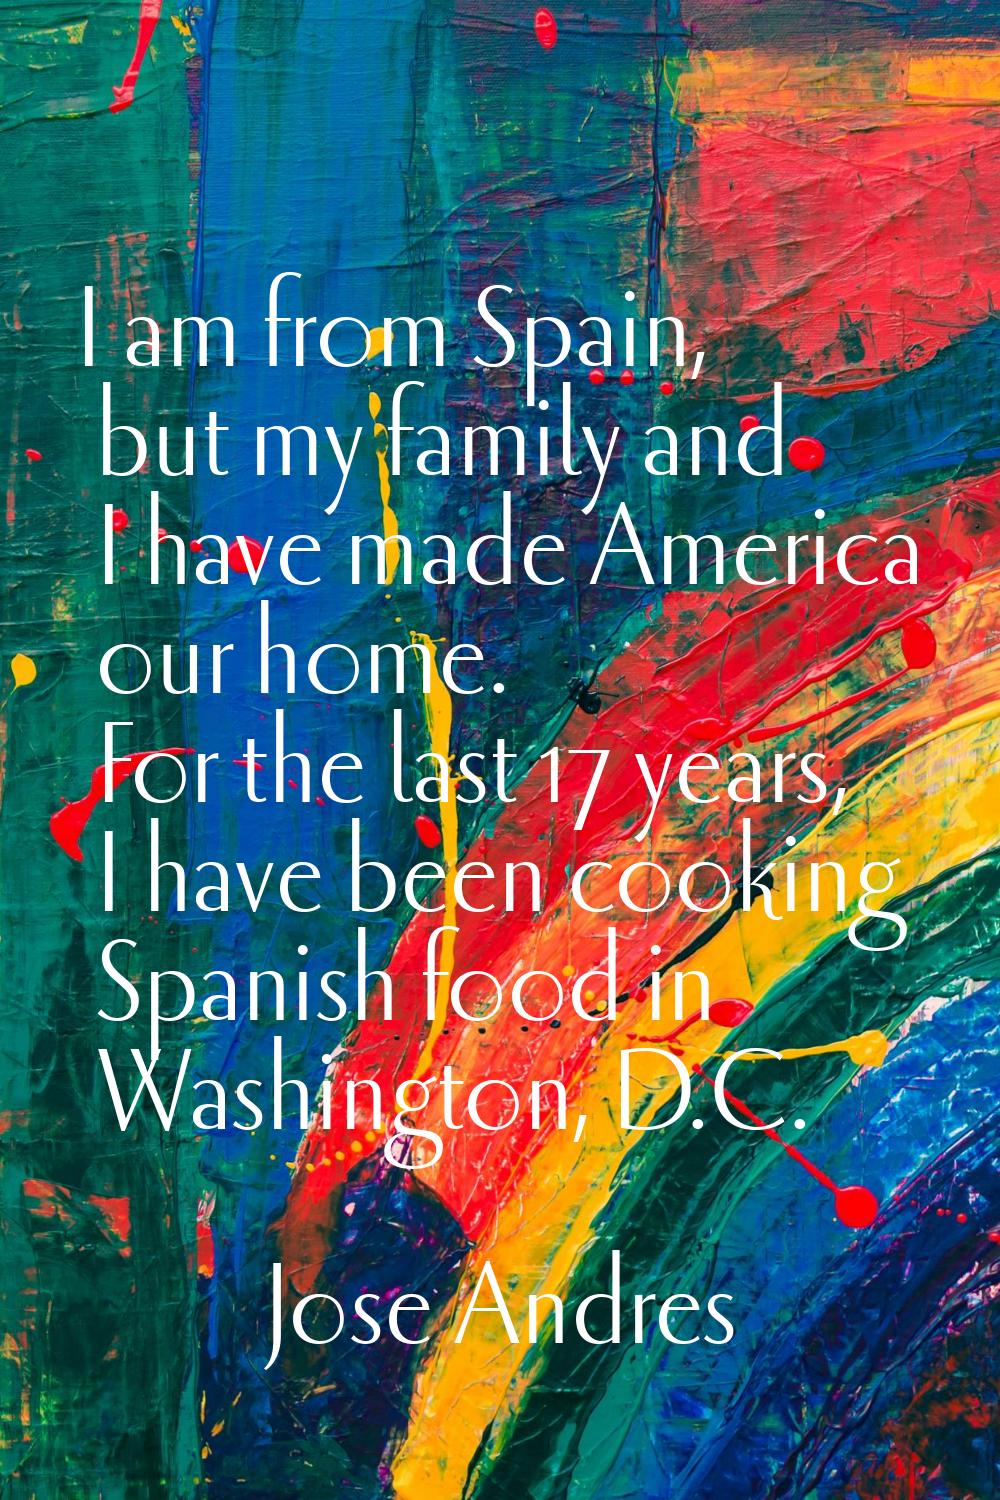 I am from Spain, but my family and I have made America our home. For the last 17 years, I have been